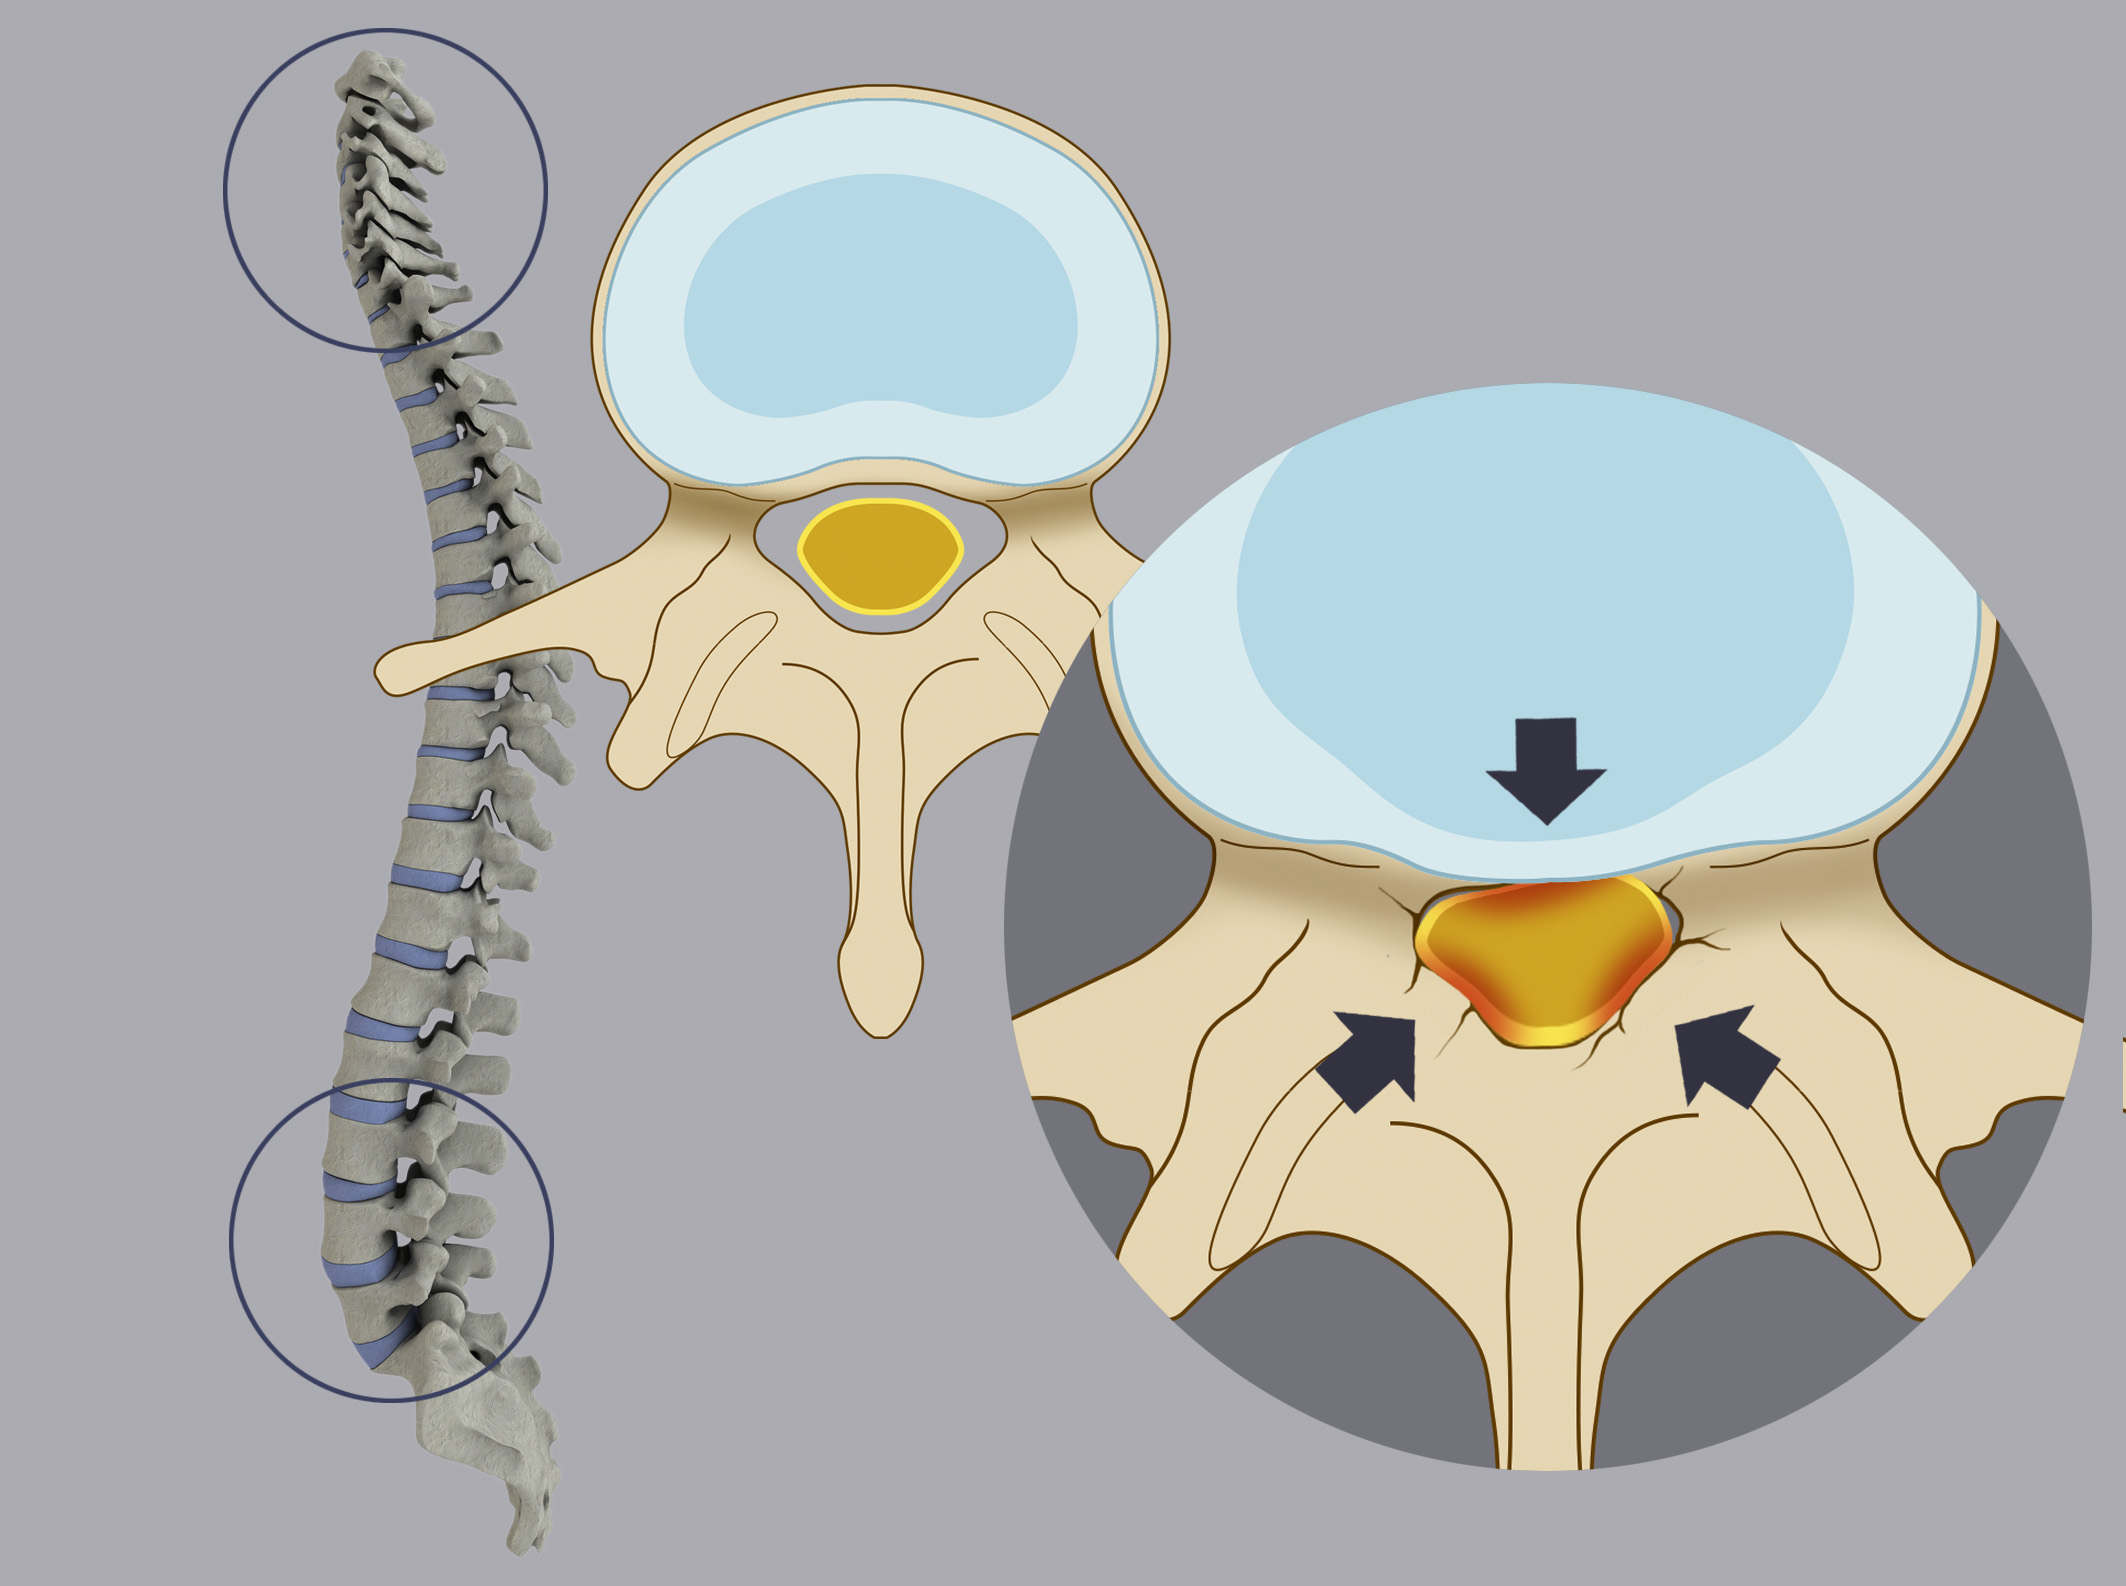  Stenosis is a narrowing of the spinal canal, so that nerve roots and/or spinal cord are compressed.